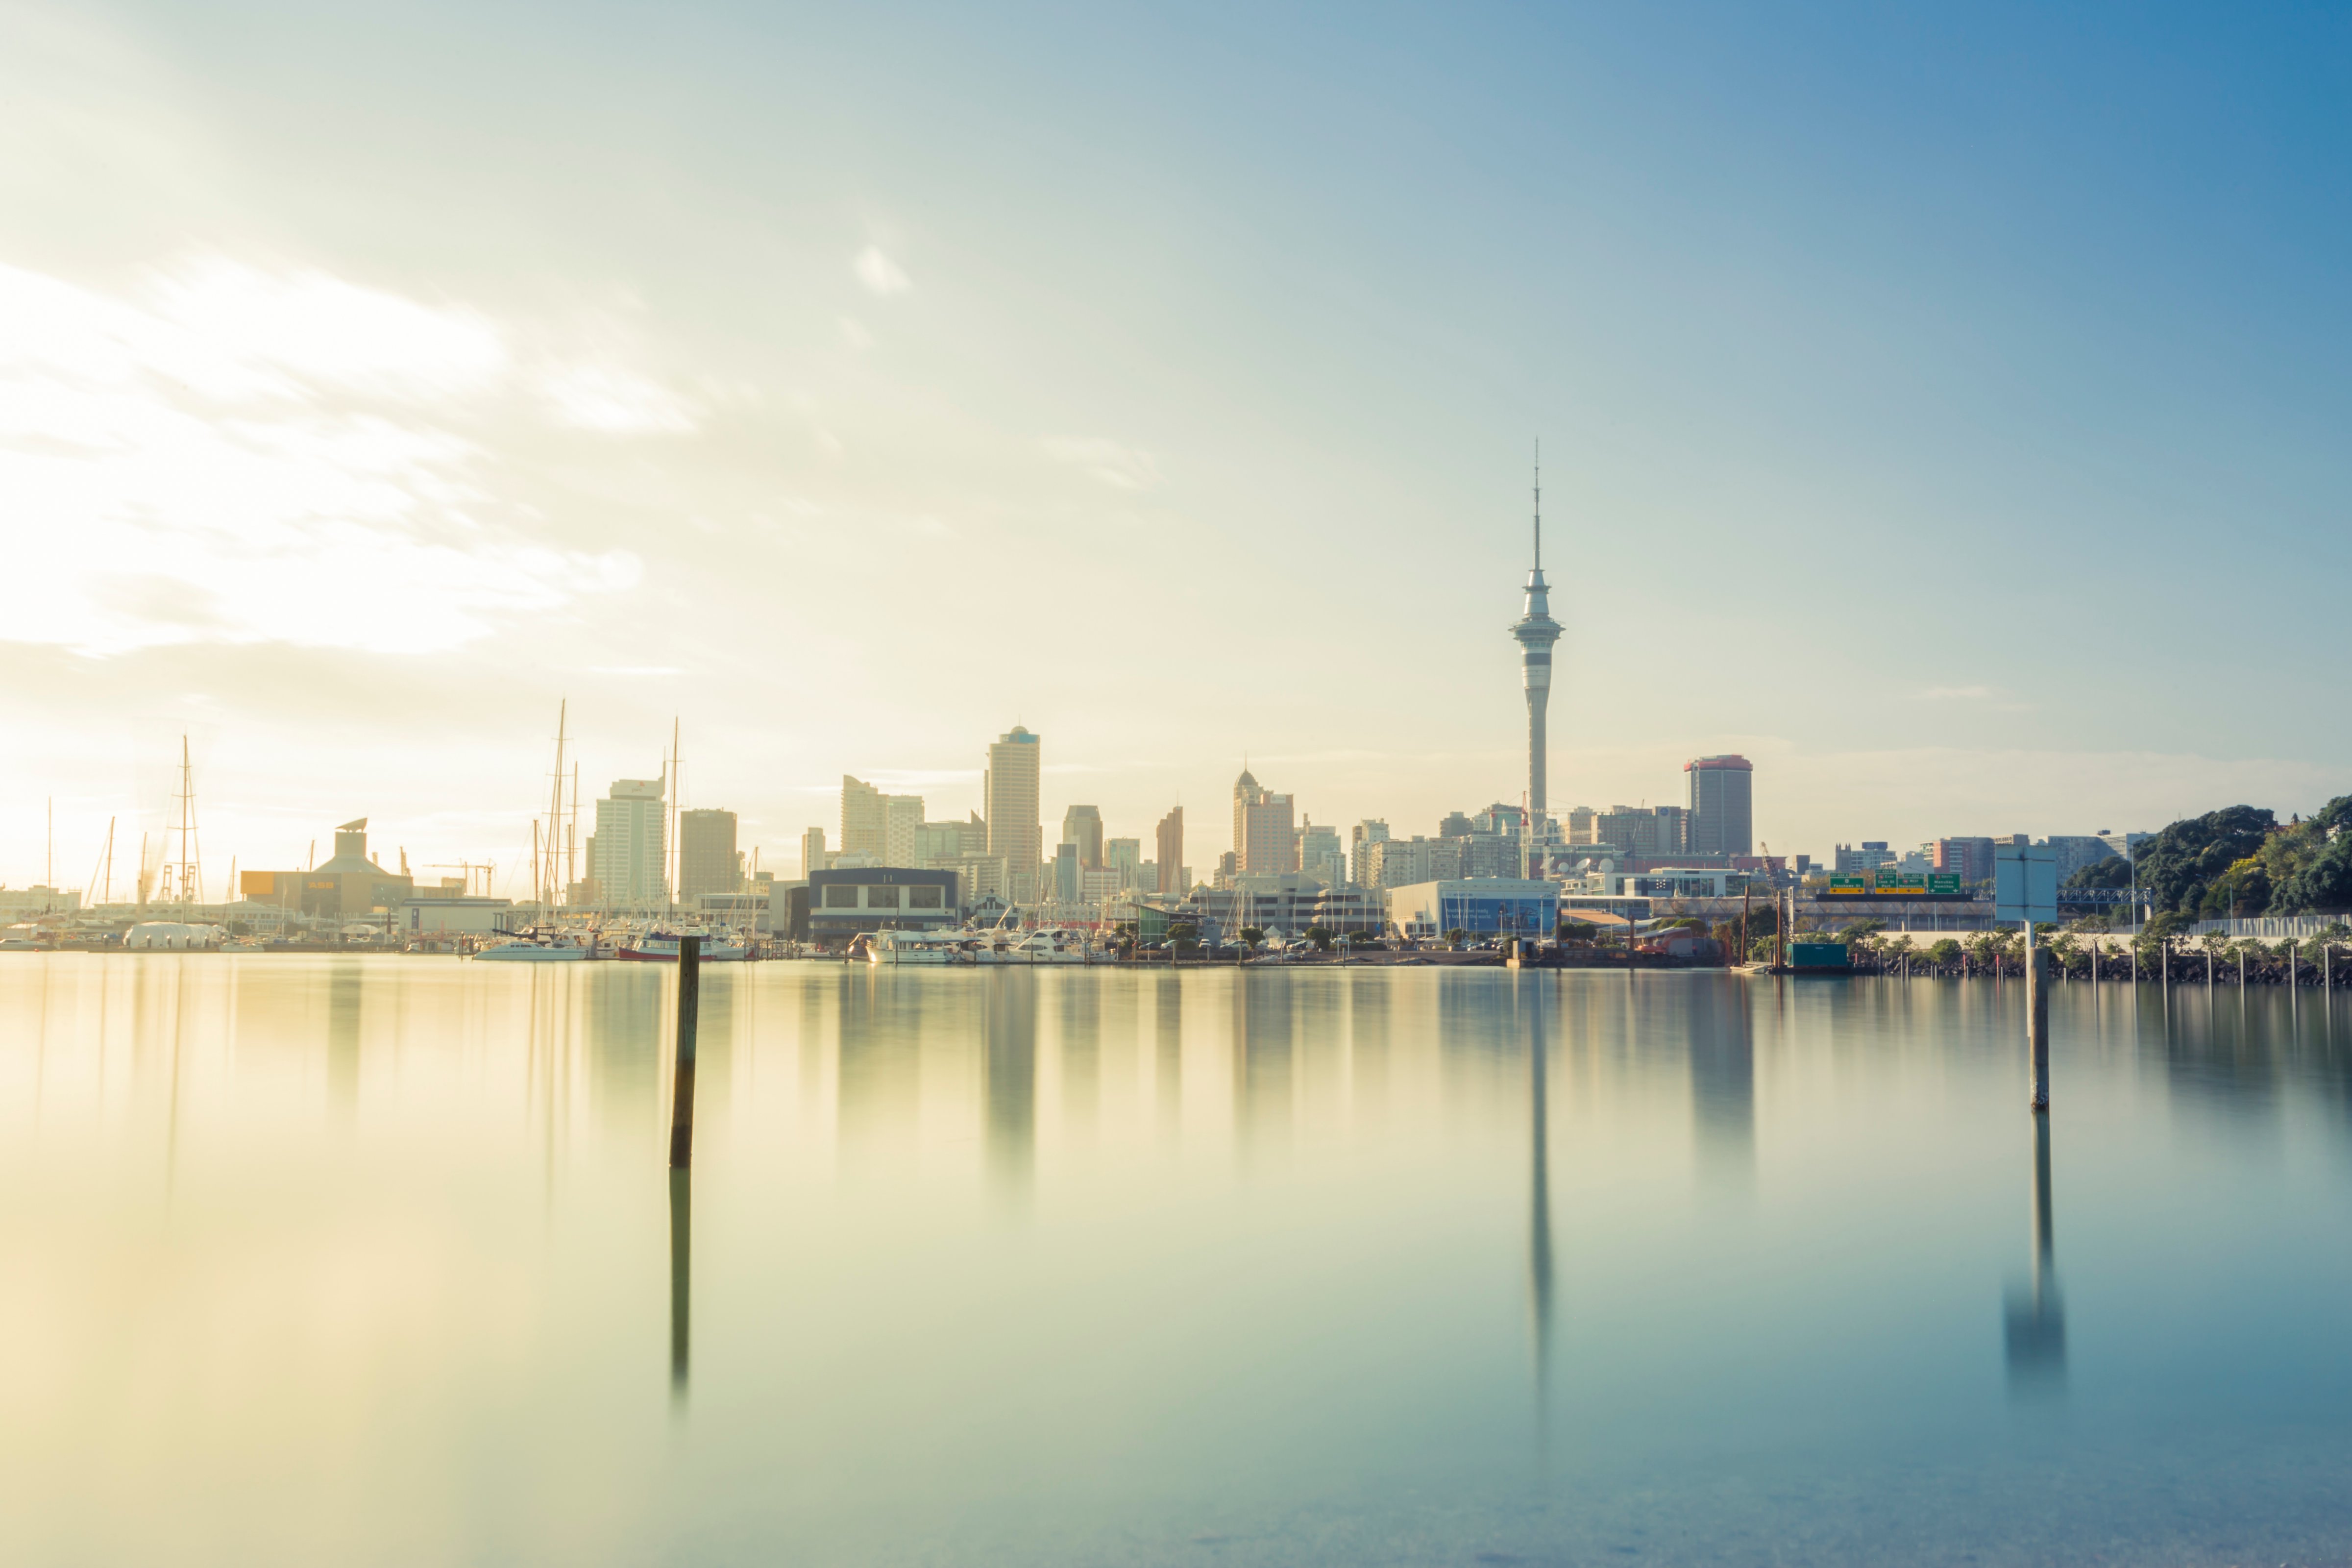 Long exposure of Auckland City in the morning sun. ND1000 filter used. (Mike Mackinven—Getty Images)